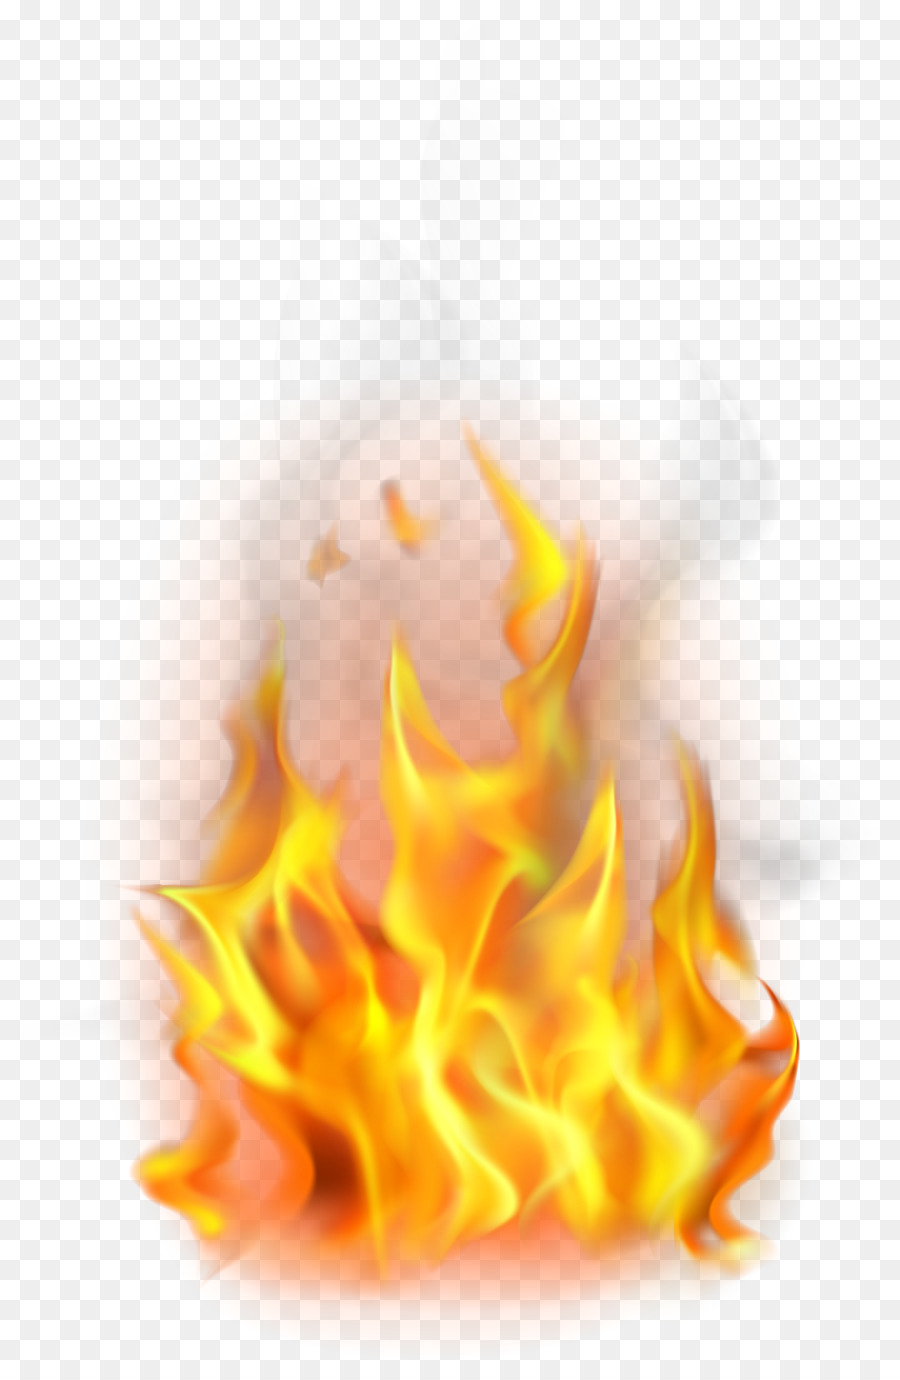 Portable Network Graphics Clip art Image Fire Flame - fire png download - 4630*7000 - Free Transparent Fire png Download.